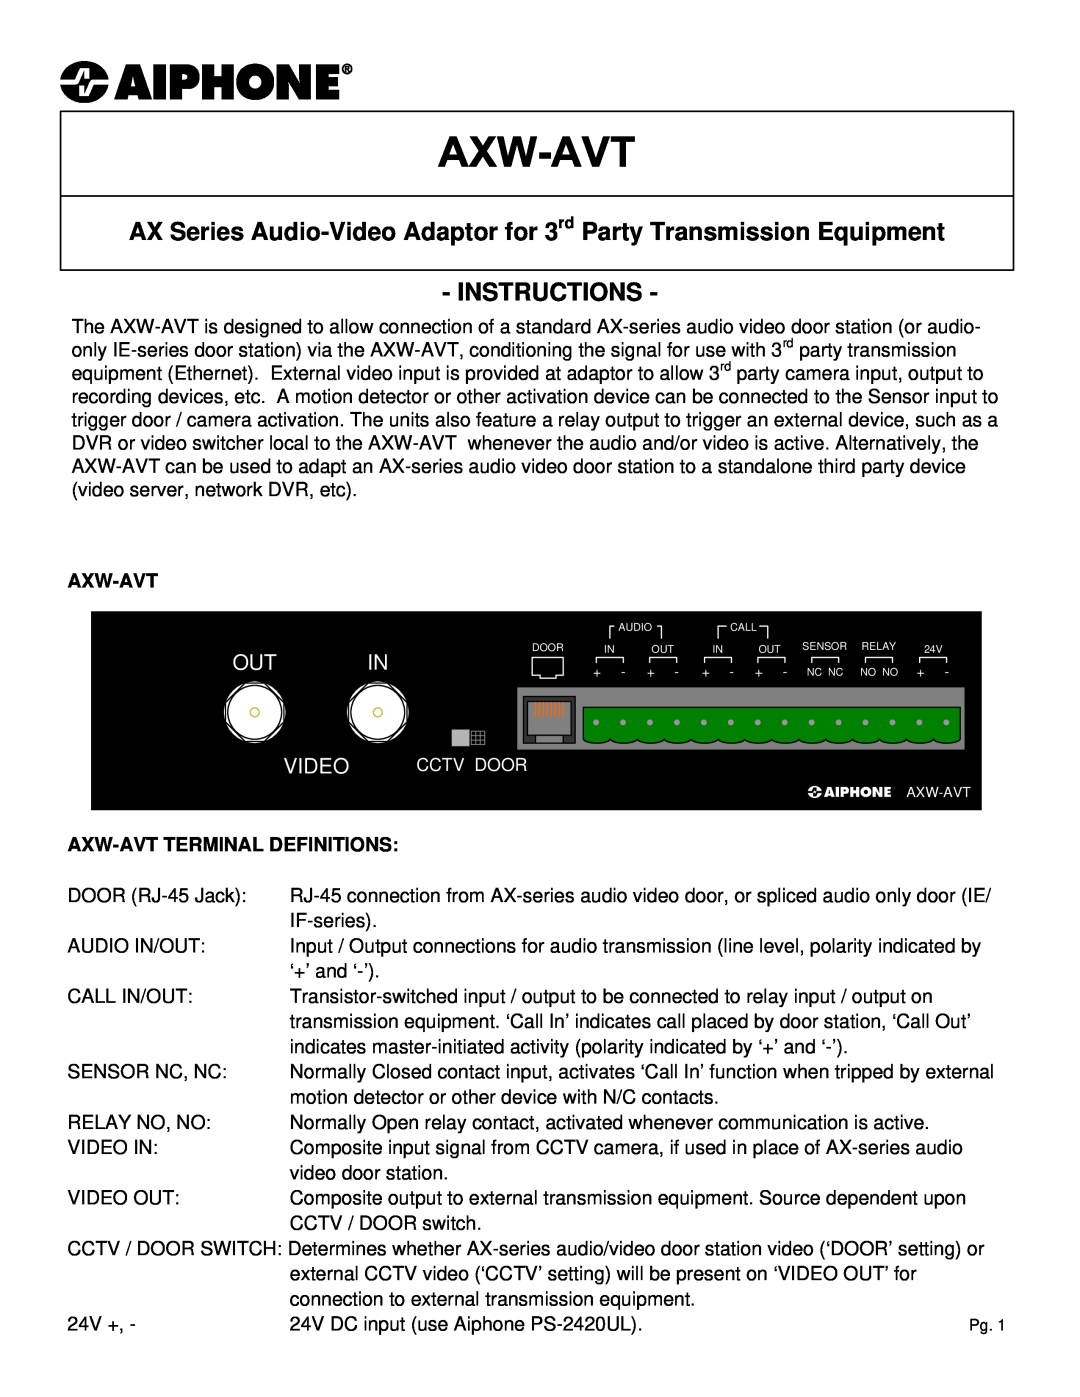 Aiphone AXW-AVT manual Instructions, Out In, Video, Axw-Avtterminal Definitions 